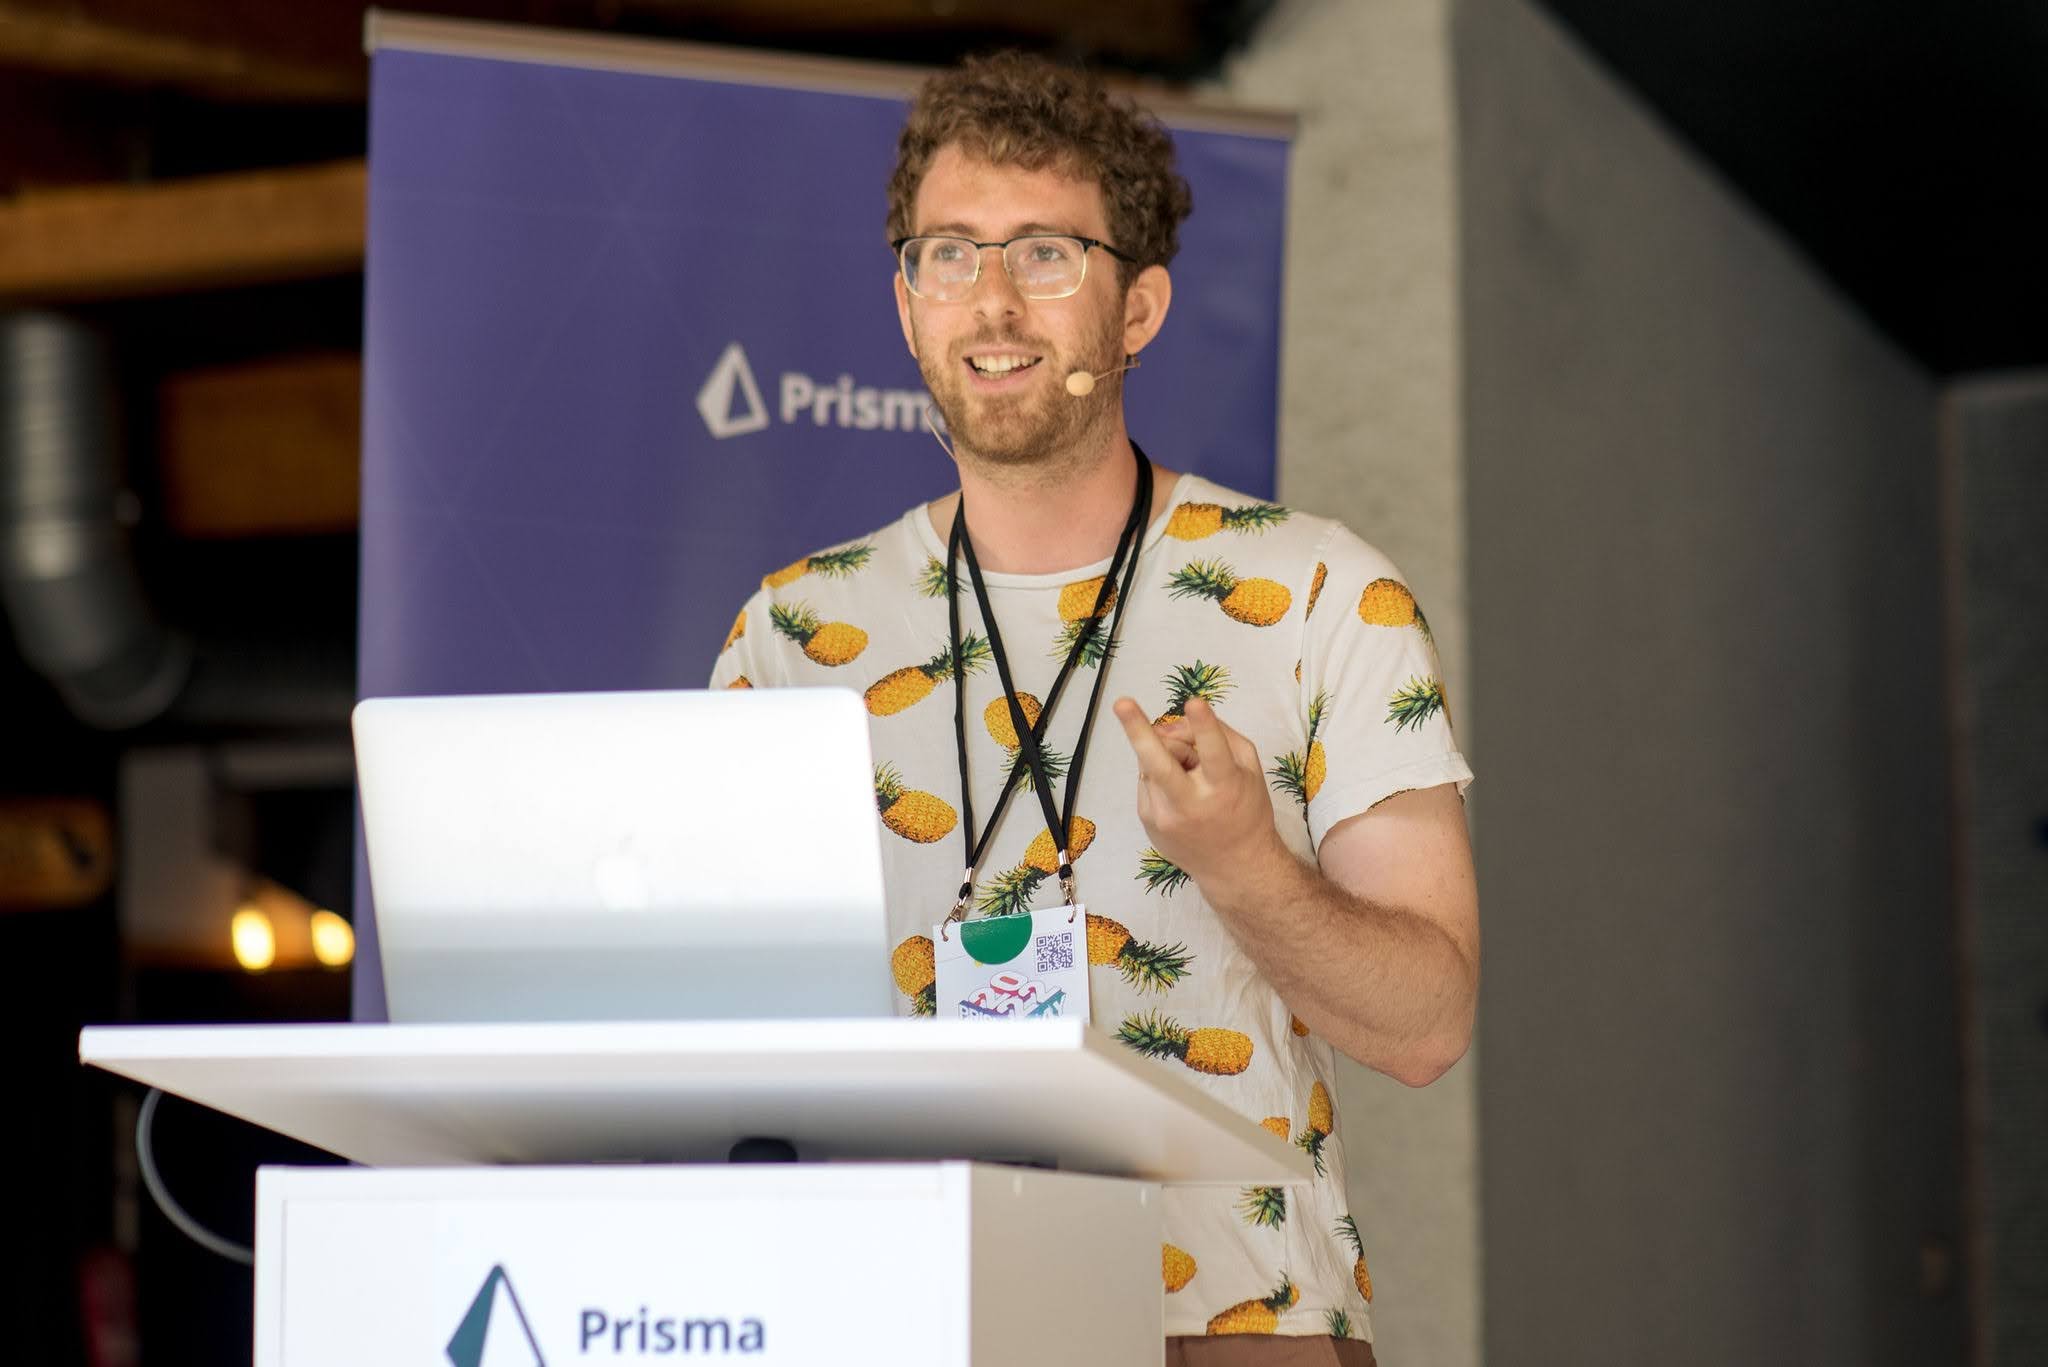 Me smiling and speaking at a conference podium, wearing a pineapples-on-white t-shirt, gesturing with one hand